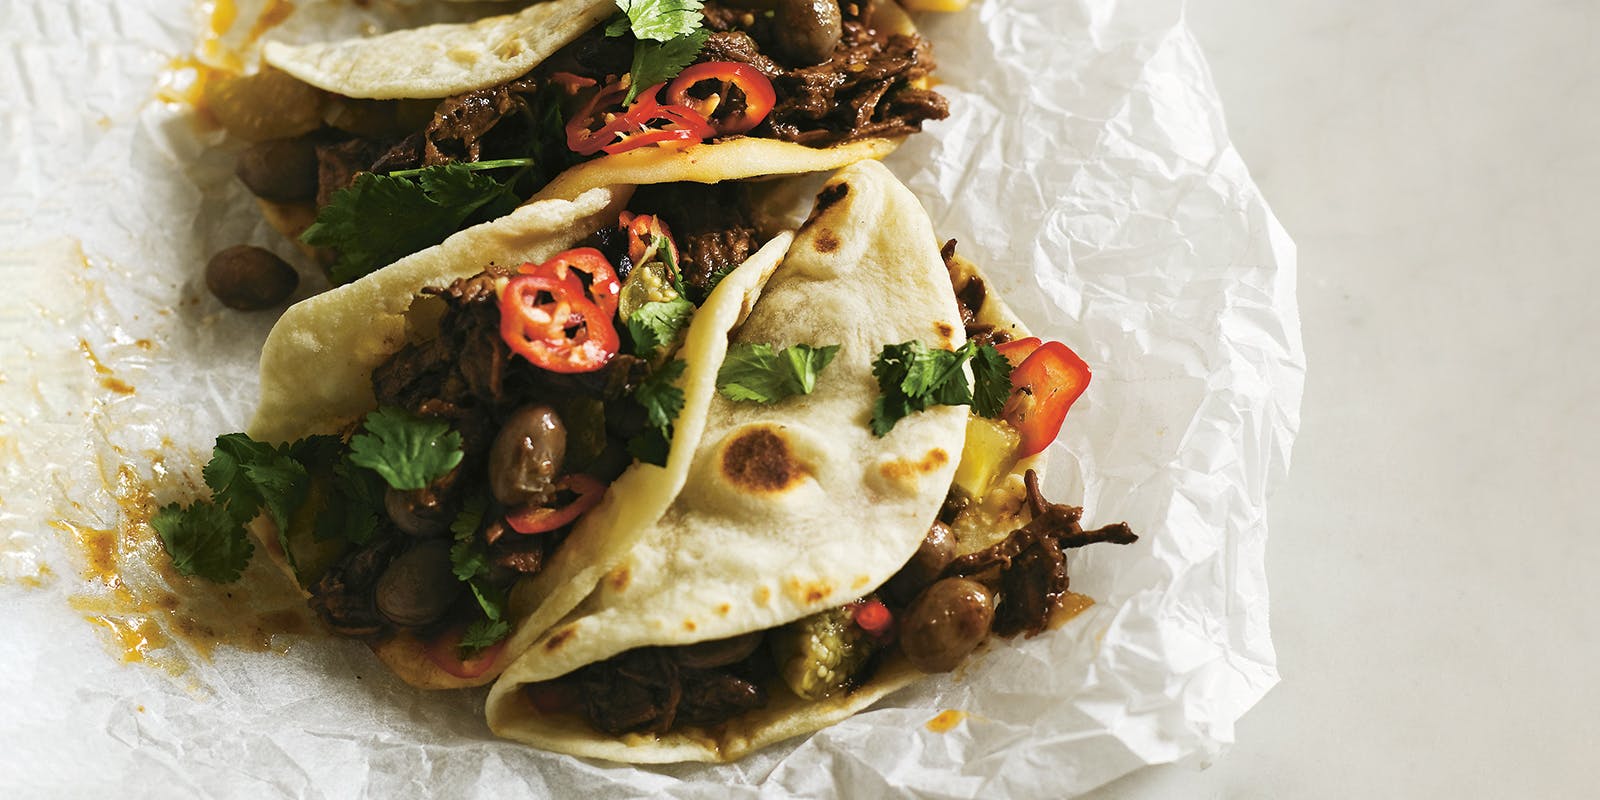 Soft Tacos with Shredded Brisket and Tomatillos